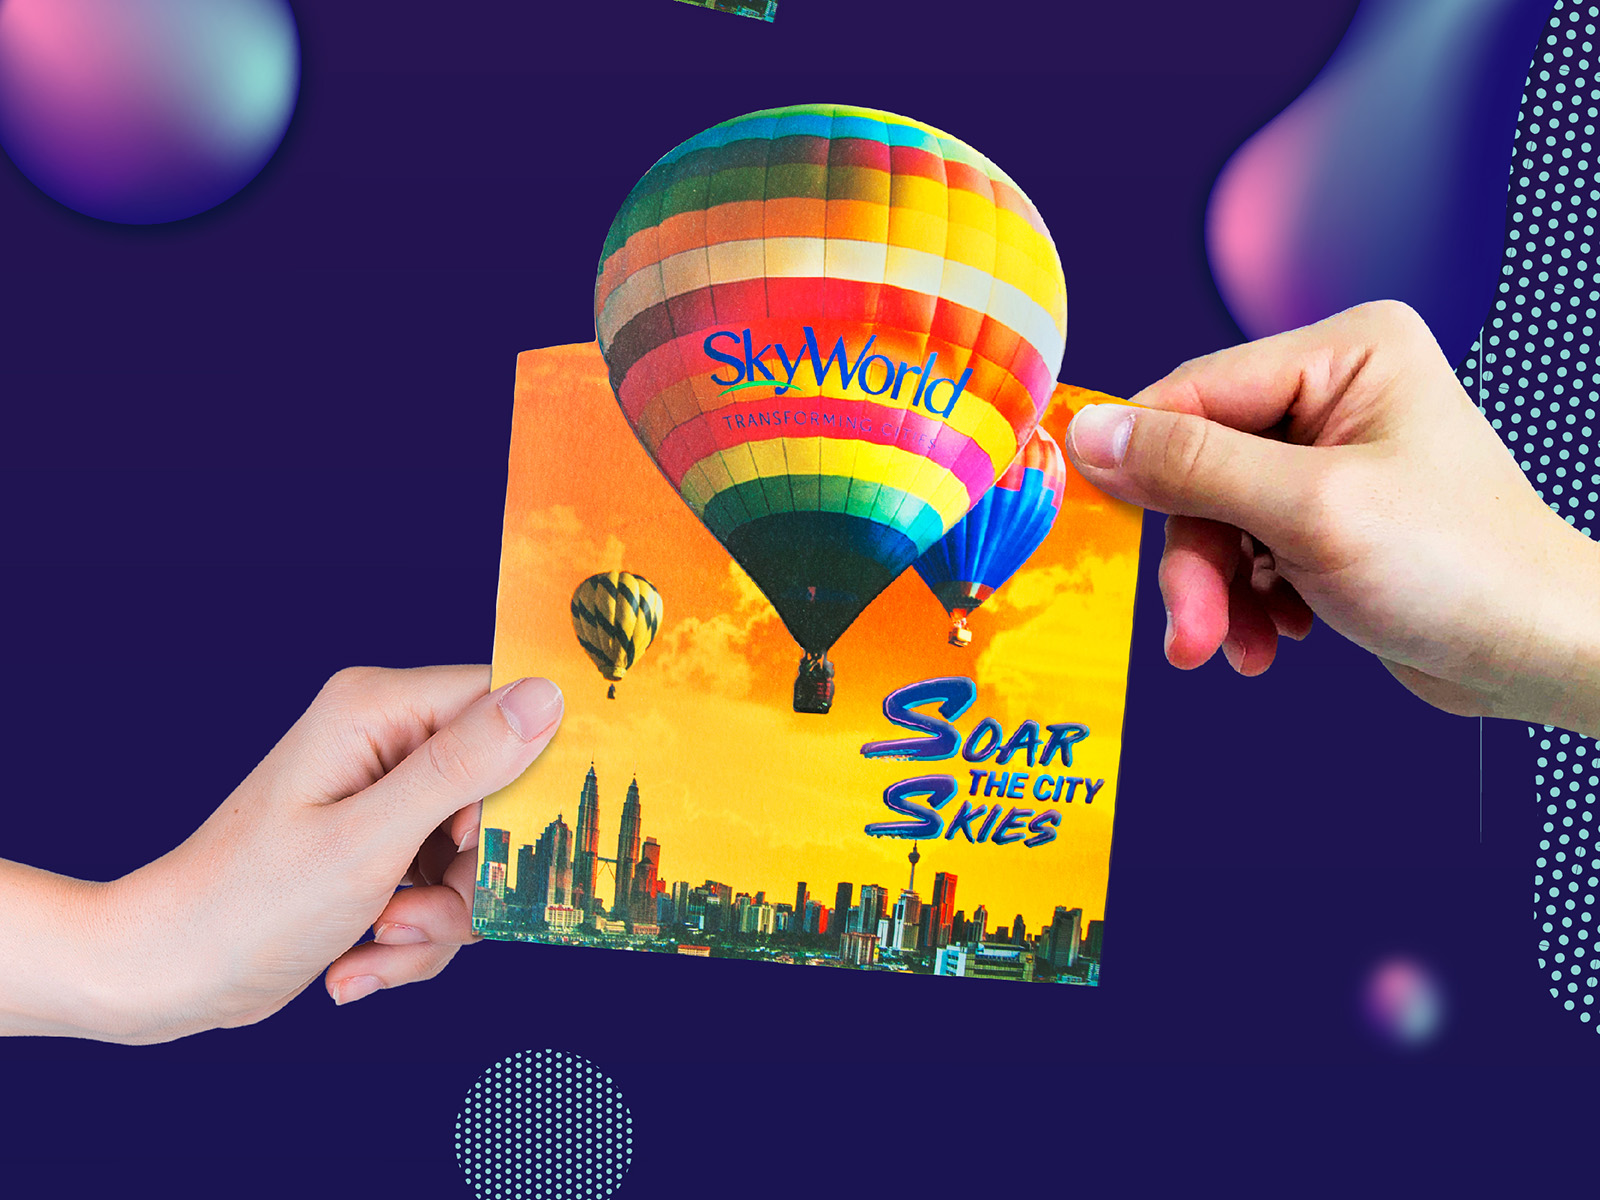 Skyworld Soar The City Skies campaign key visual design adapted to invitation card with balloon diecut and being passed from salesperson to customer